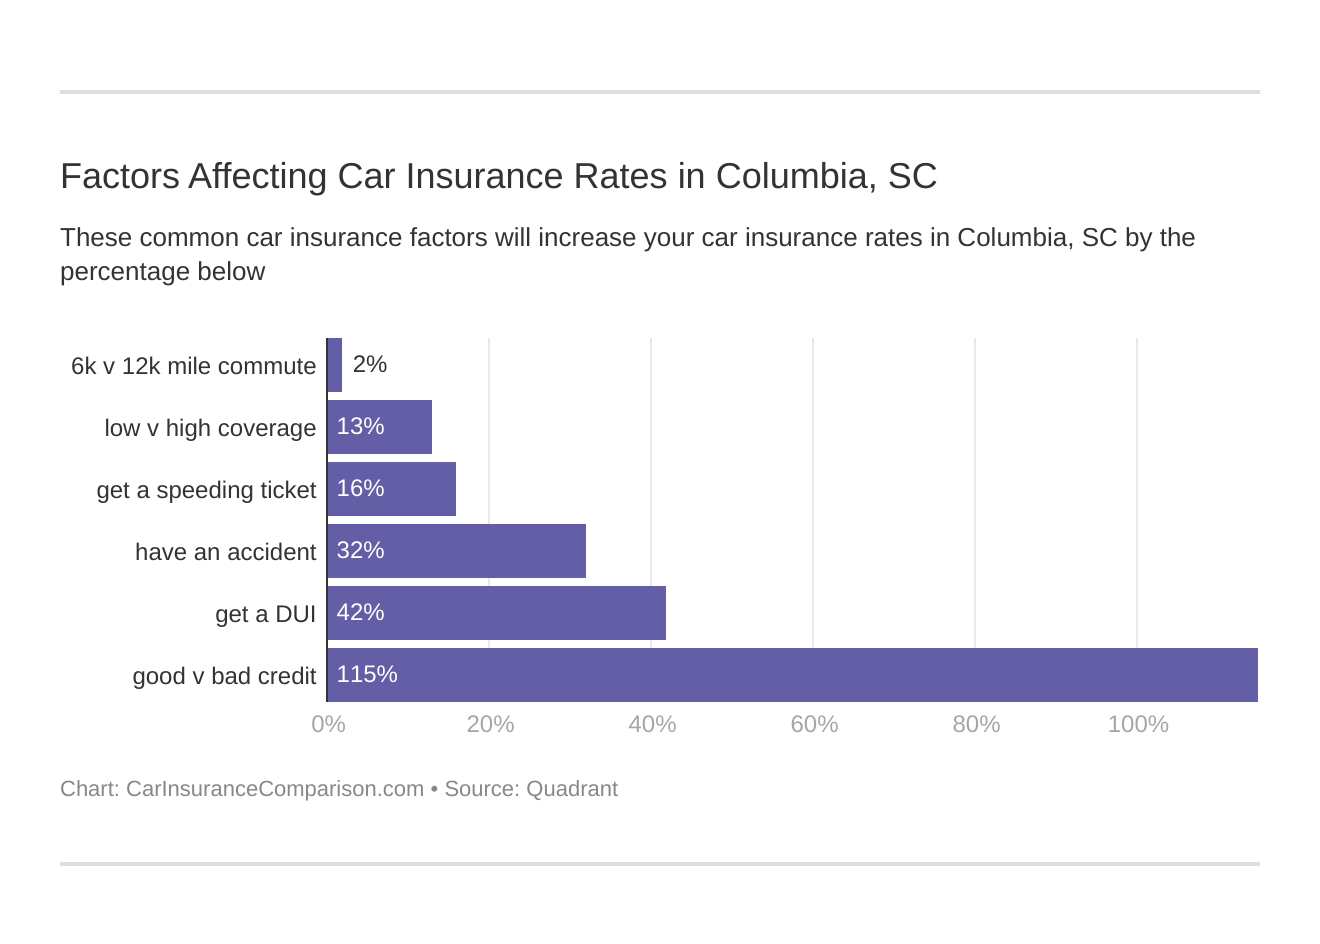 Factors Affecting Car Insurance Rates in Columbia, SC